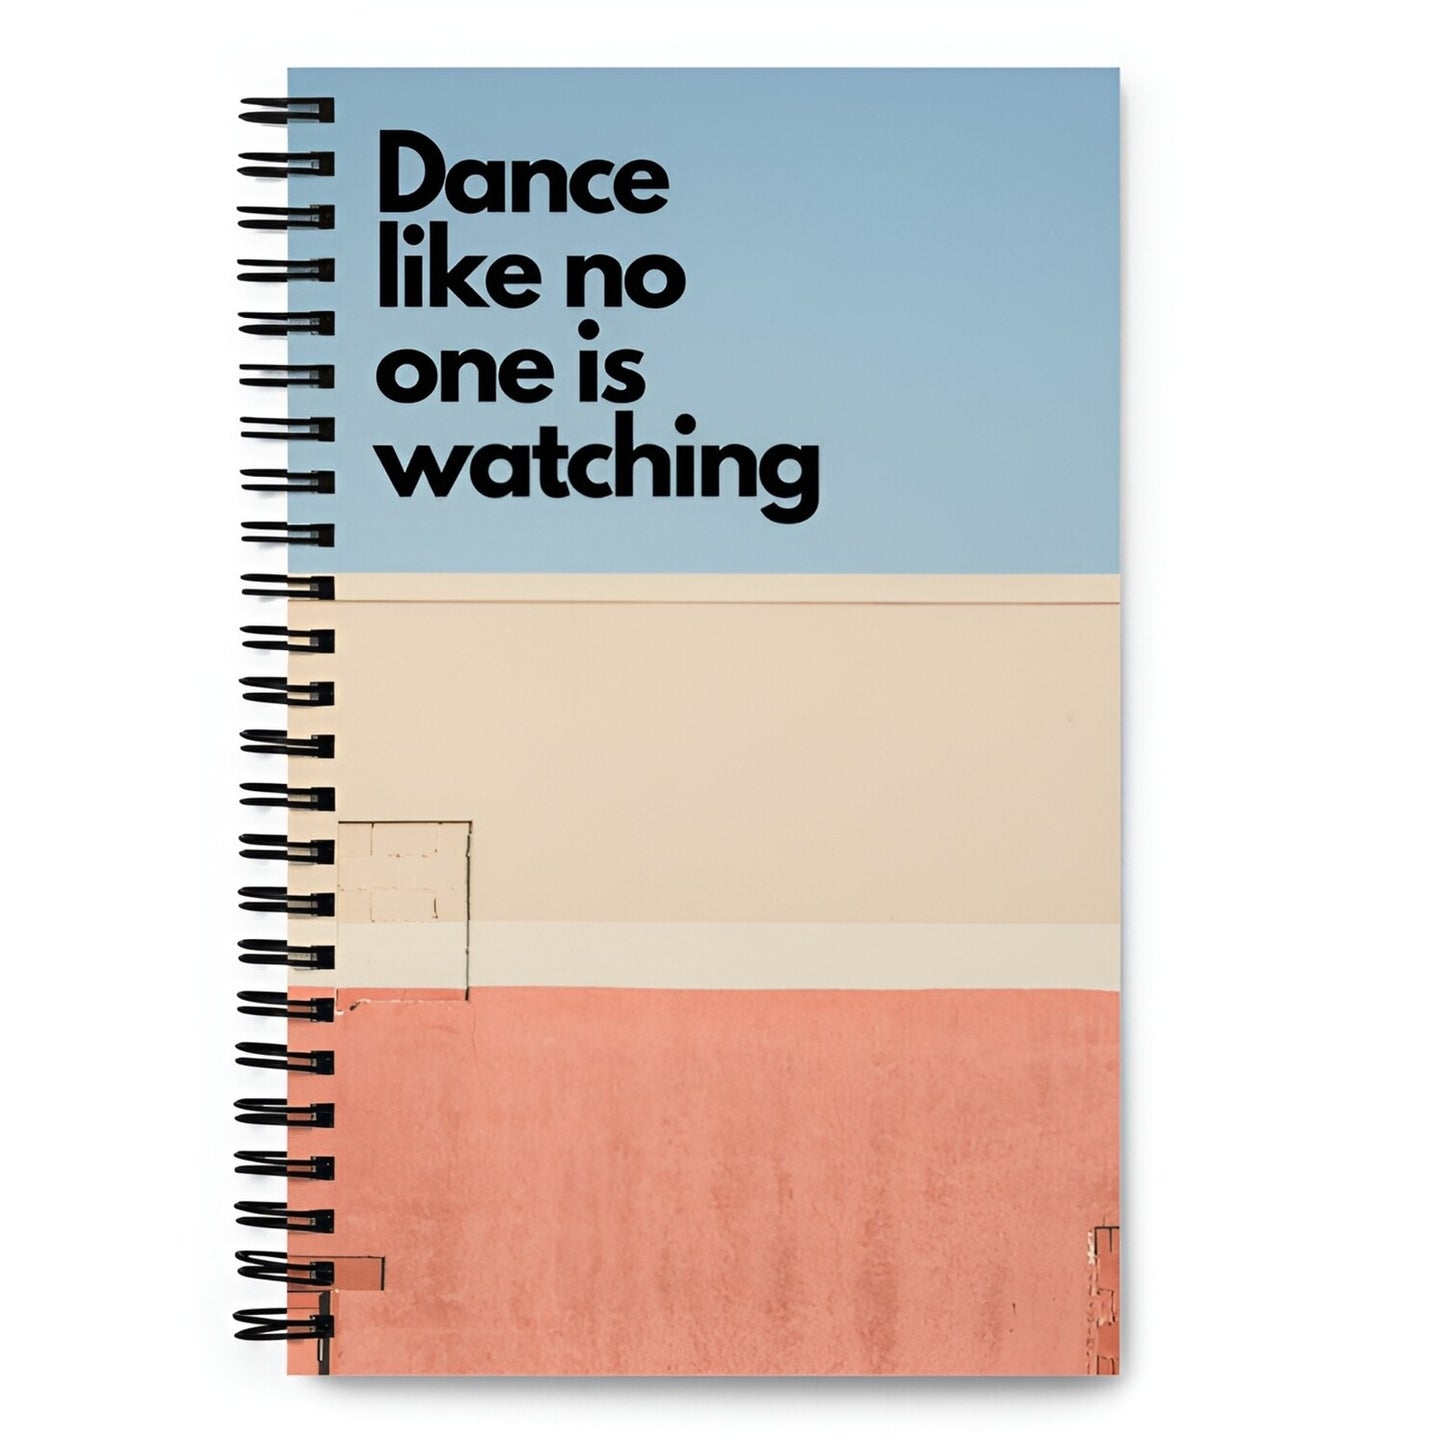 Dance like no one is watching - Spiral notebook inspired by Wes Anderson style